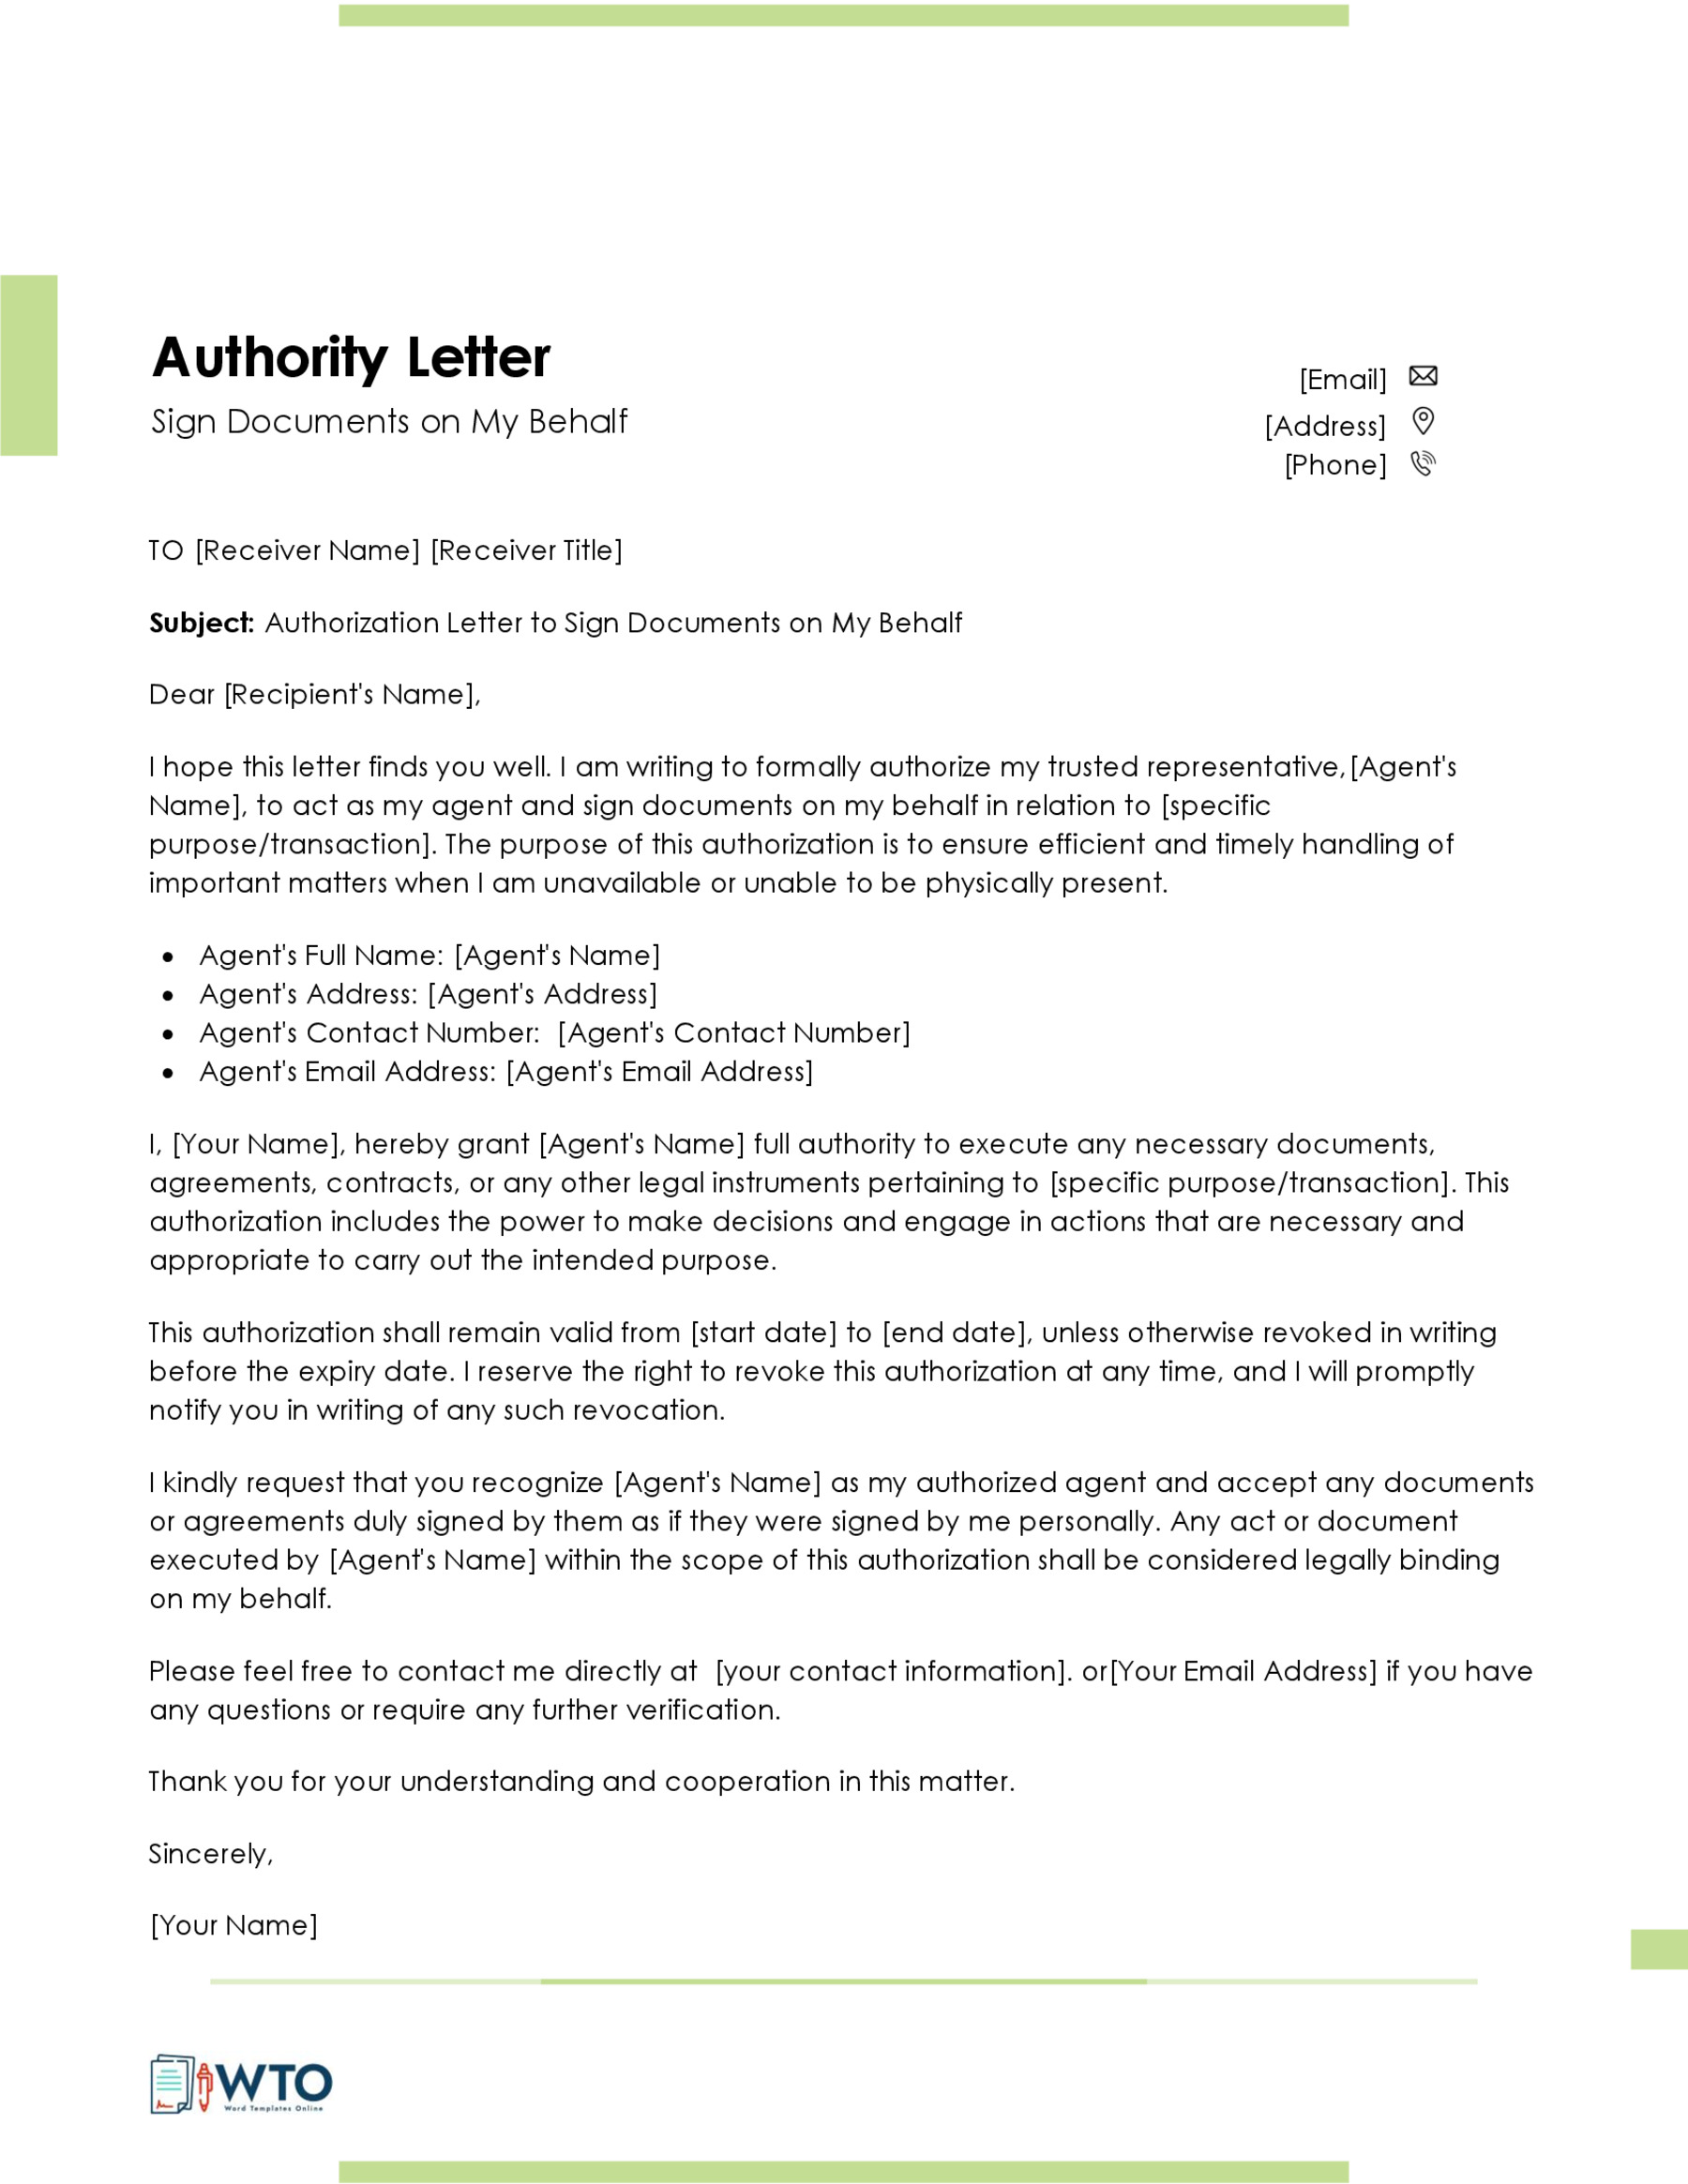 Authorization letter to to Sigh Documents Template-Free in Ms Word